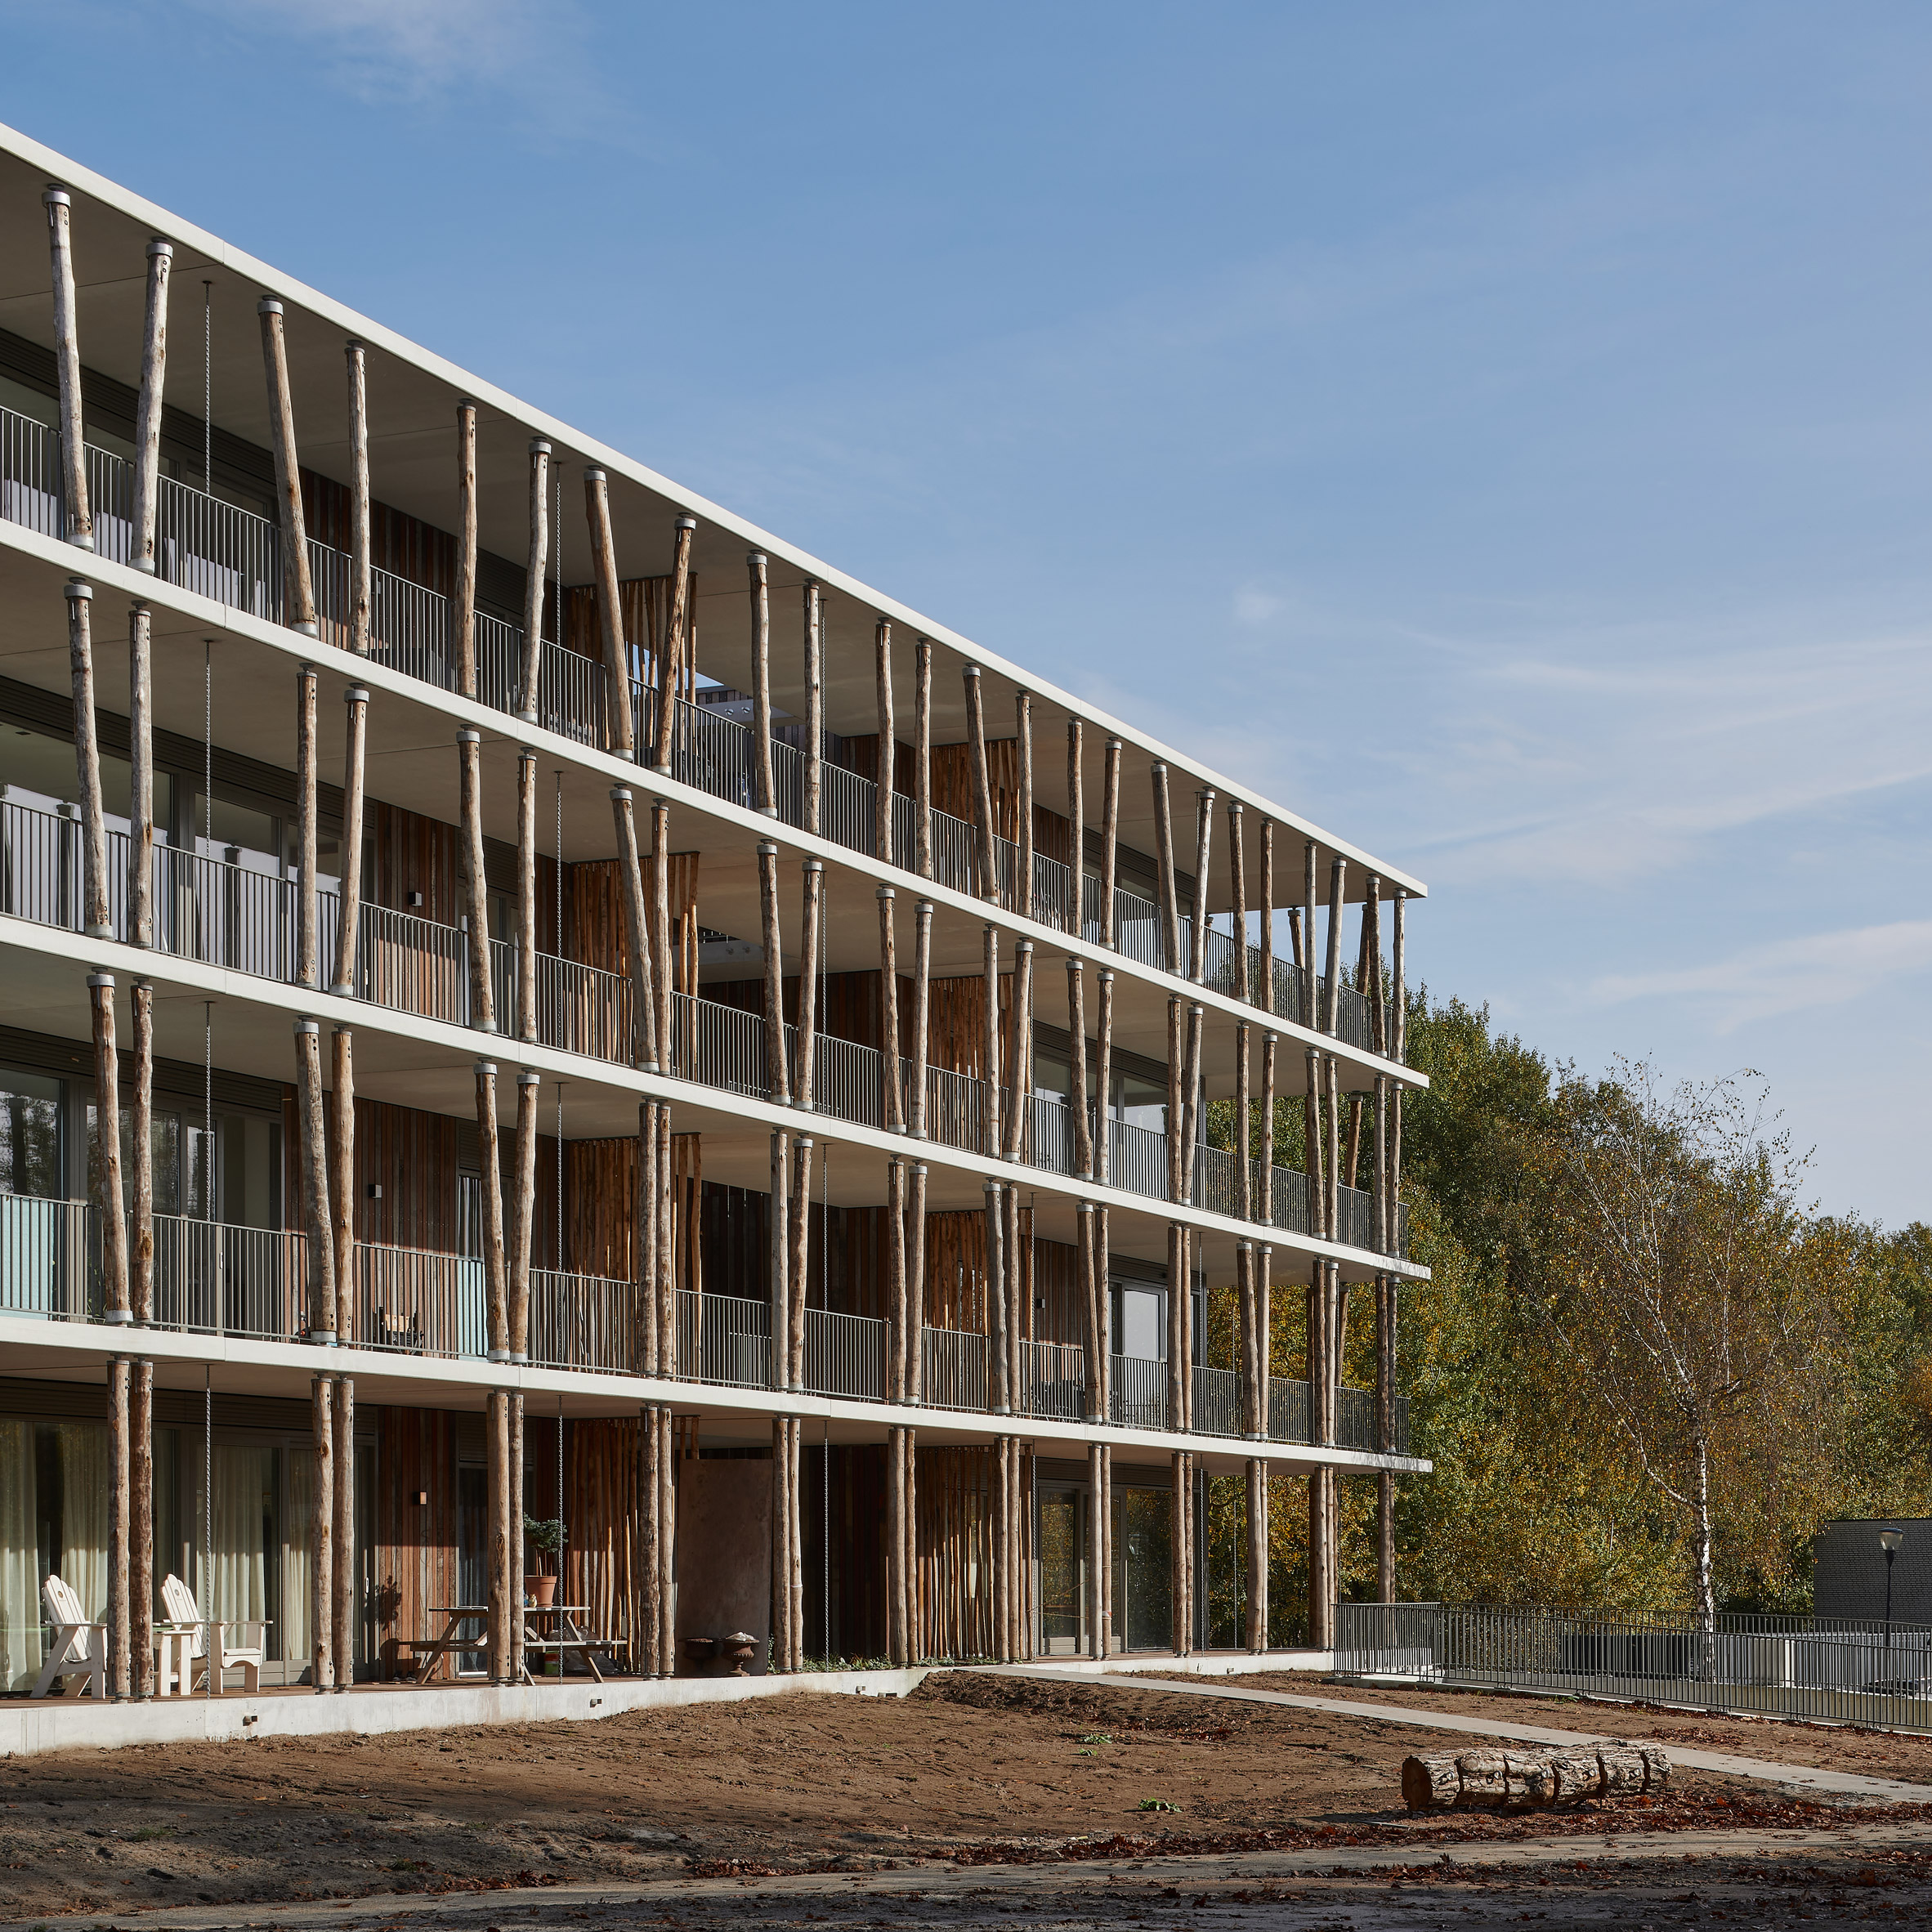 GAAGA-designed housing in the Netherlands